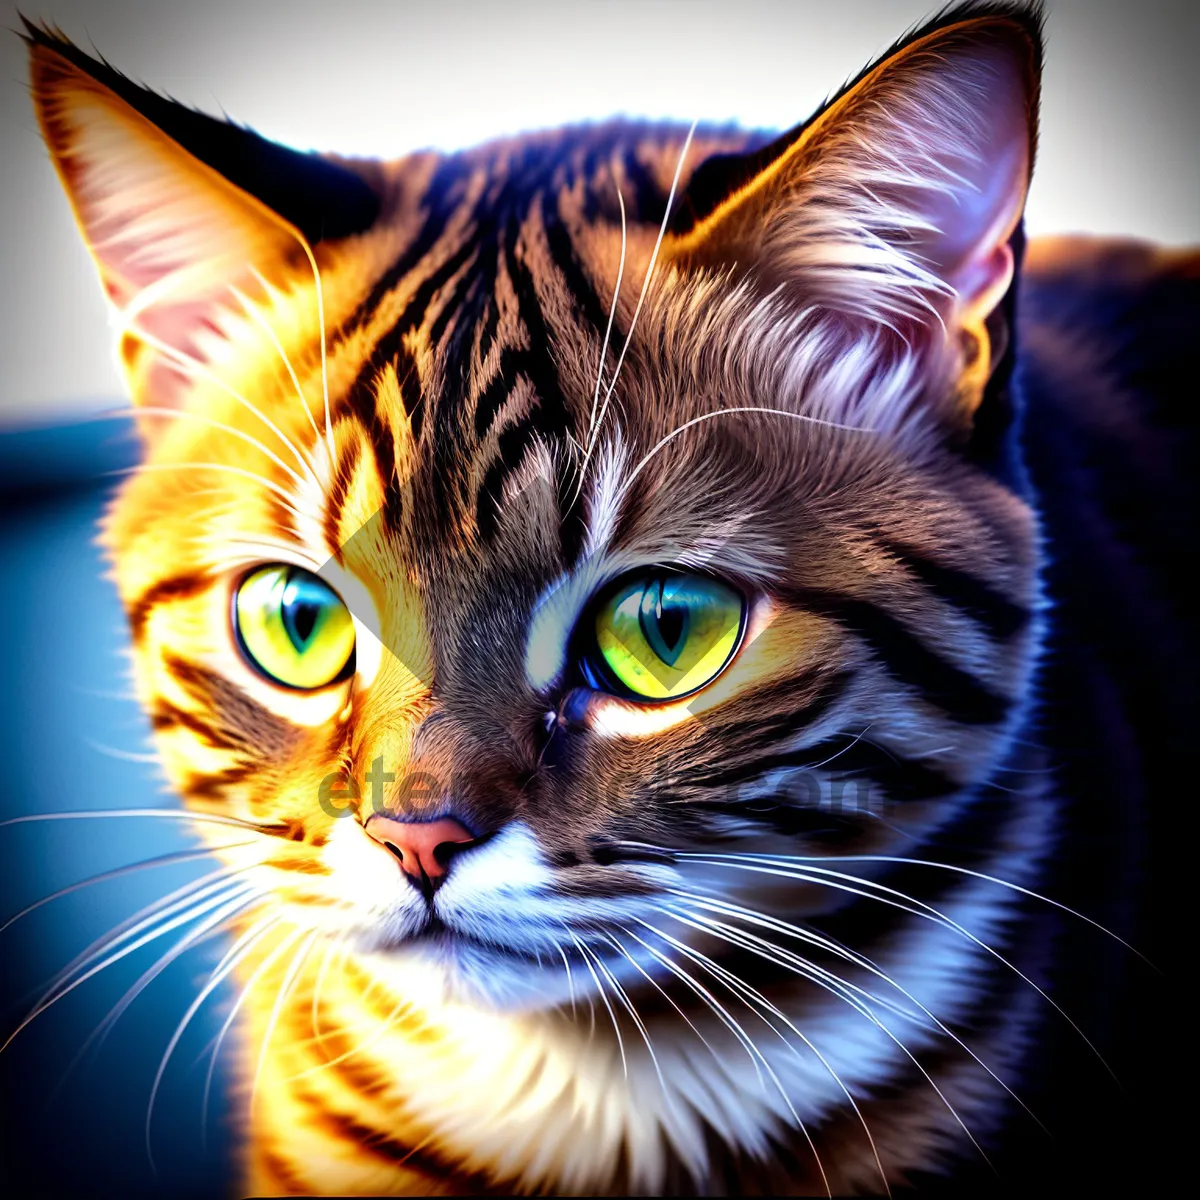 Picture of Adorable Tabby Kitty - Close-Up Portrait with Striped Fur